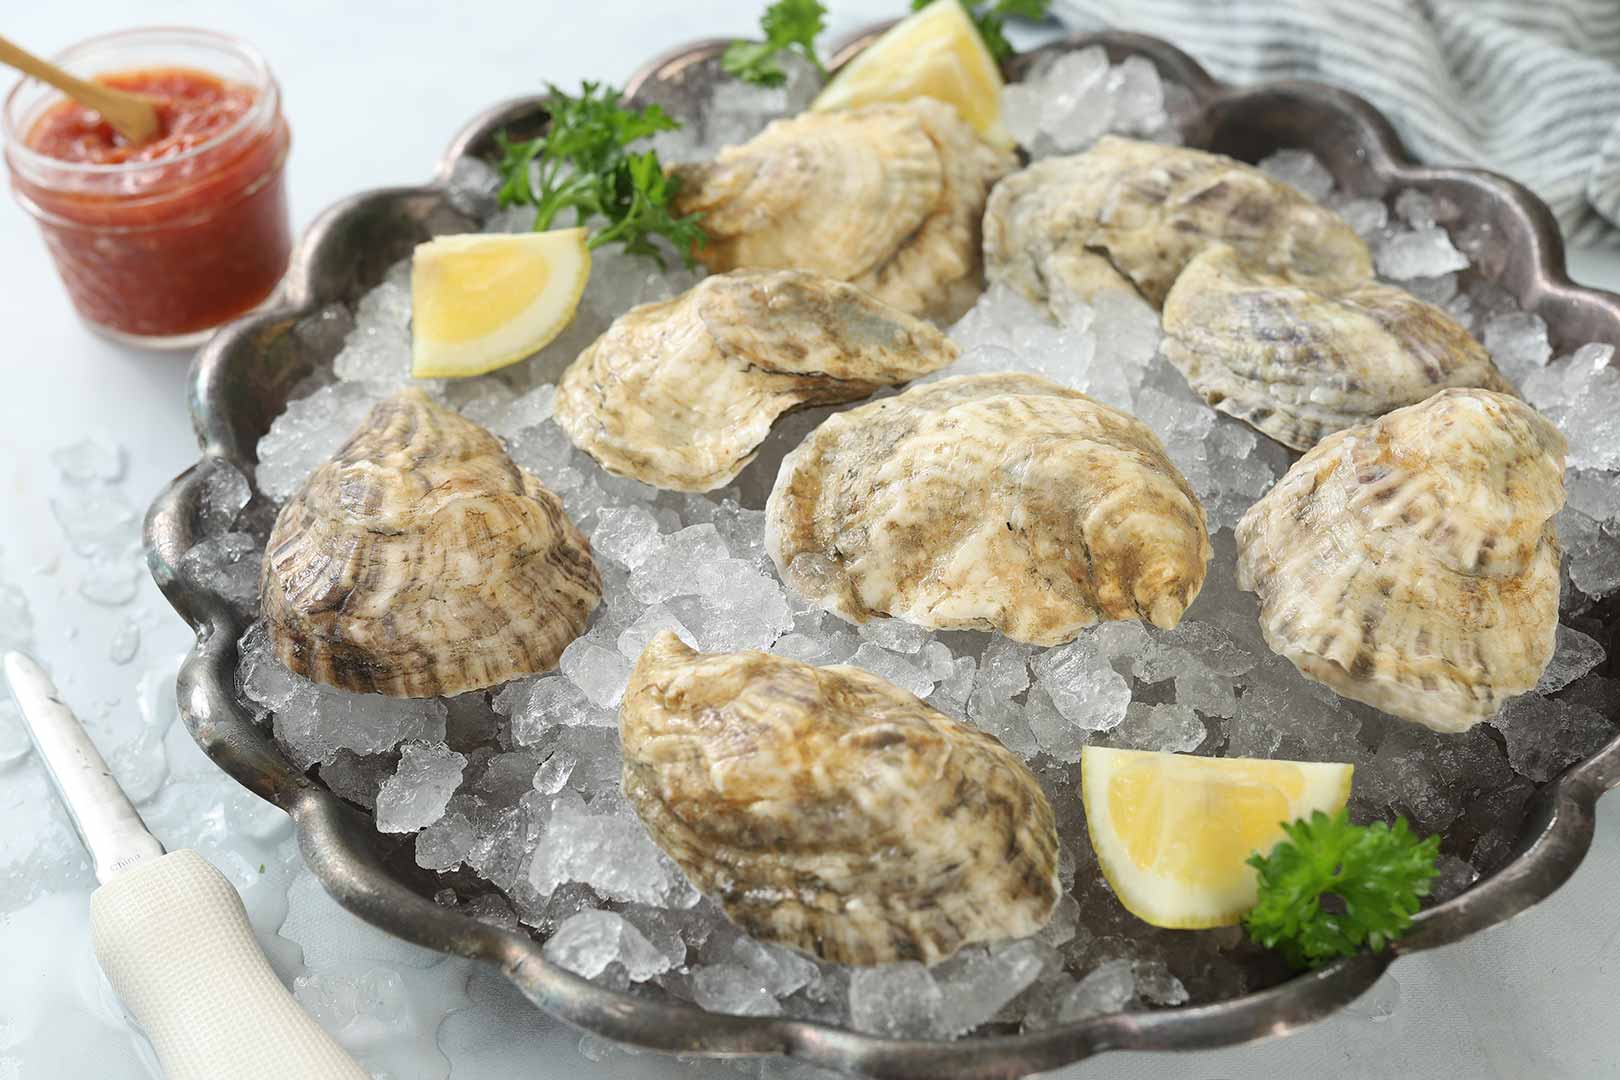 Maine Oysters